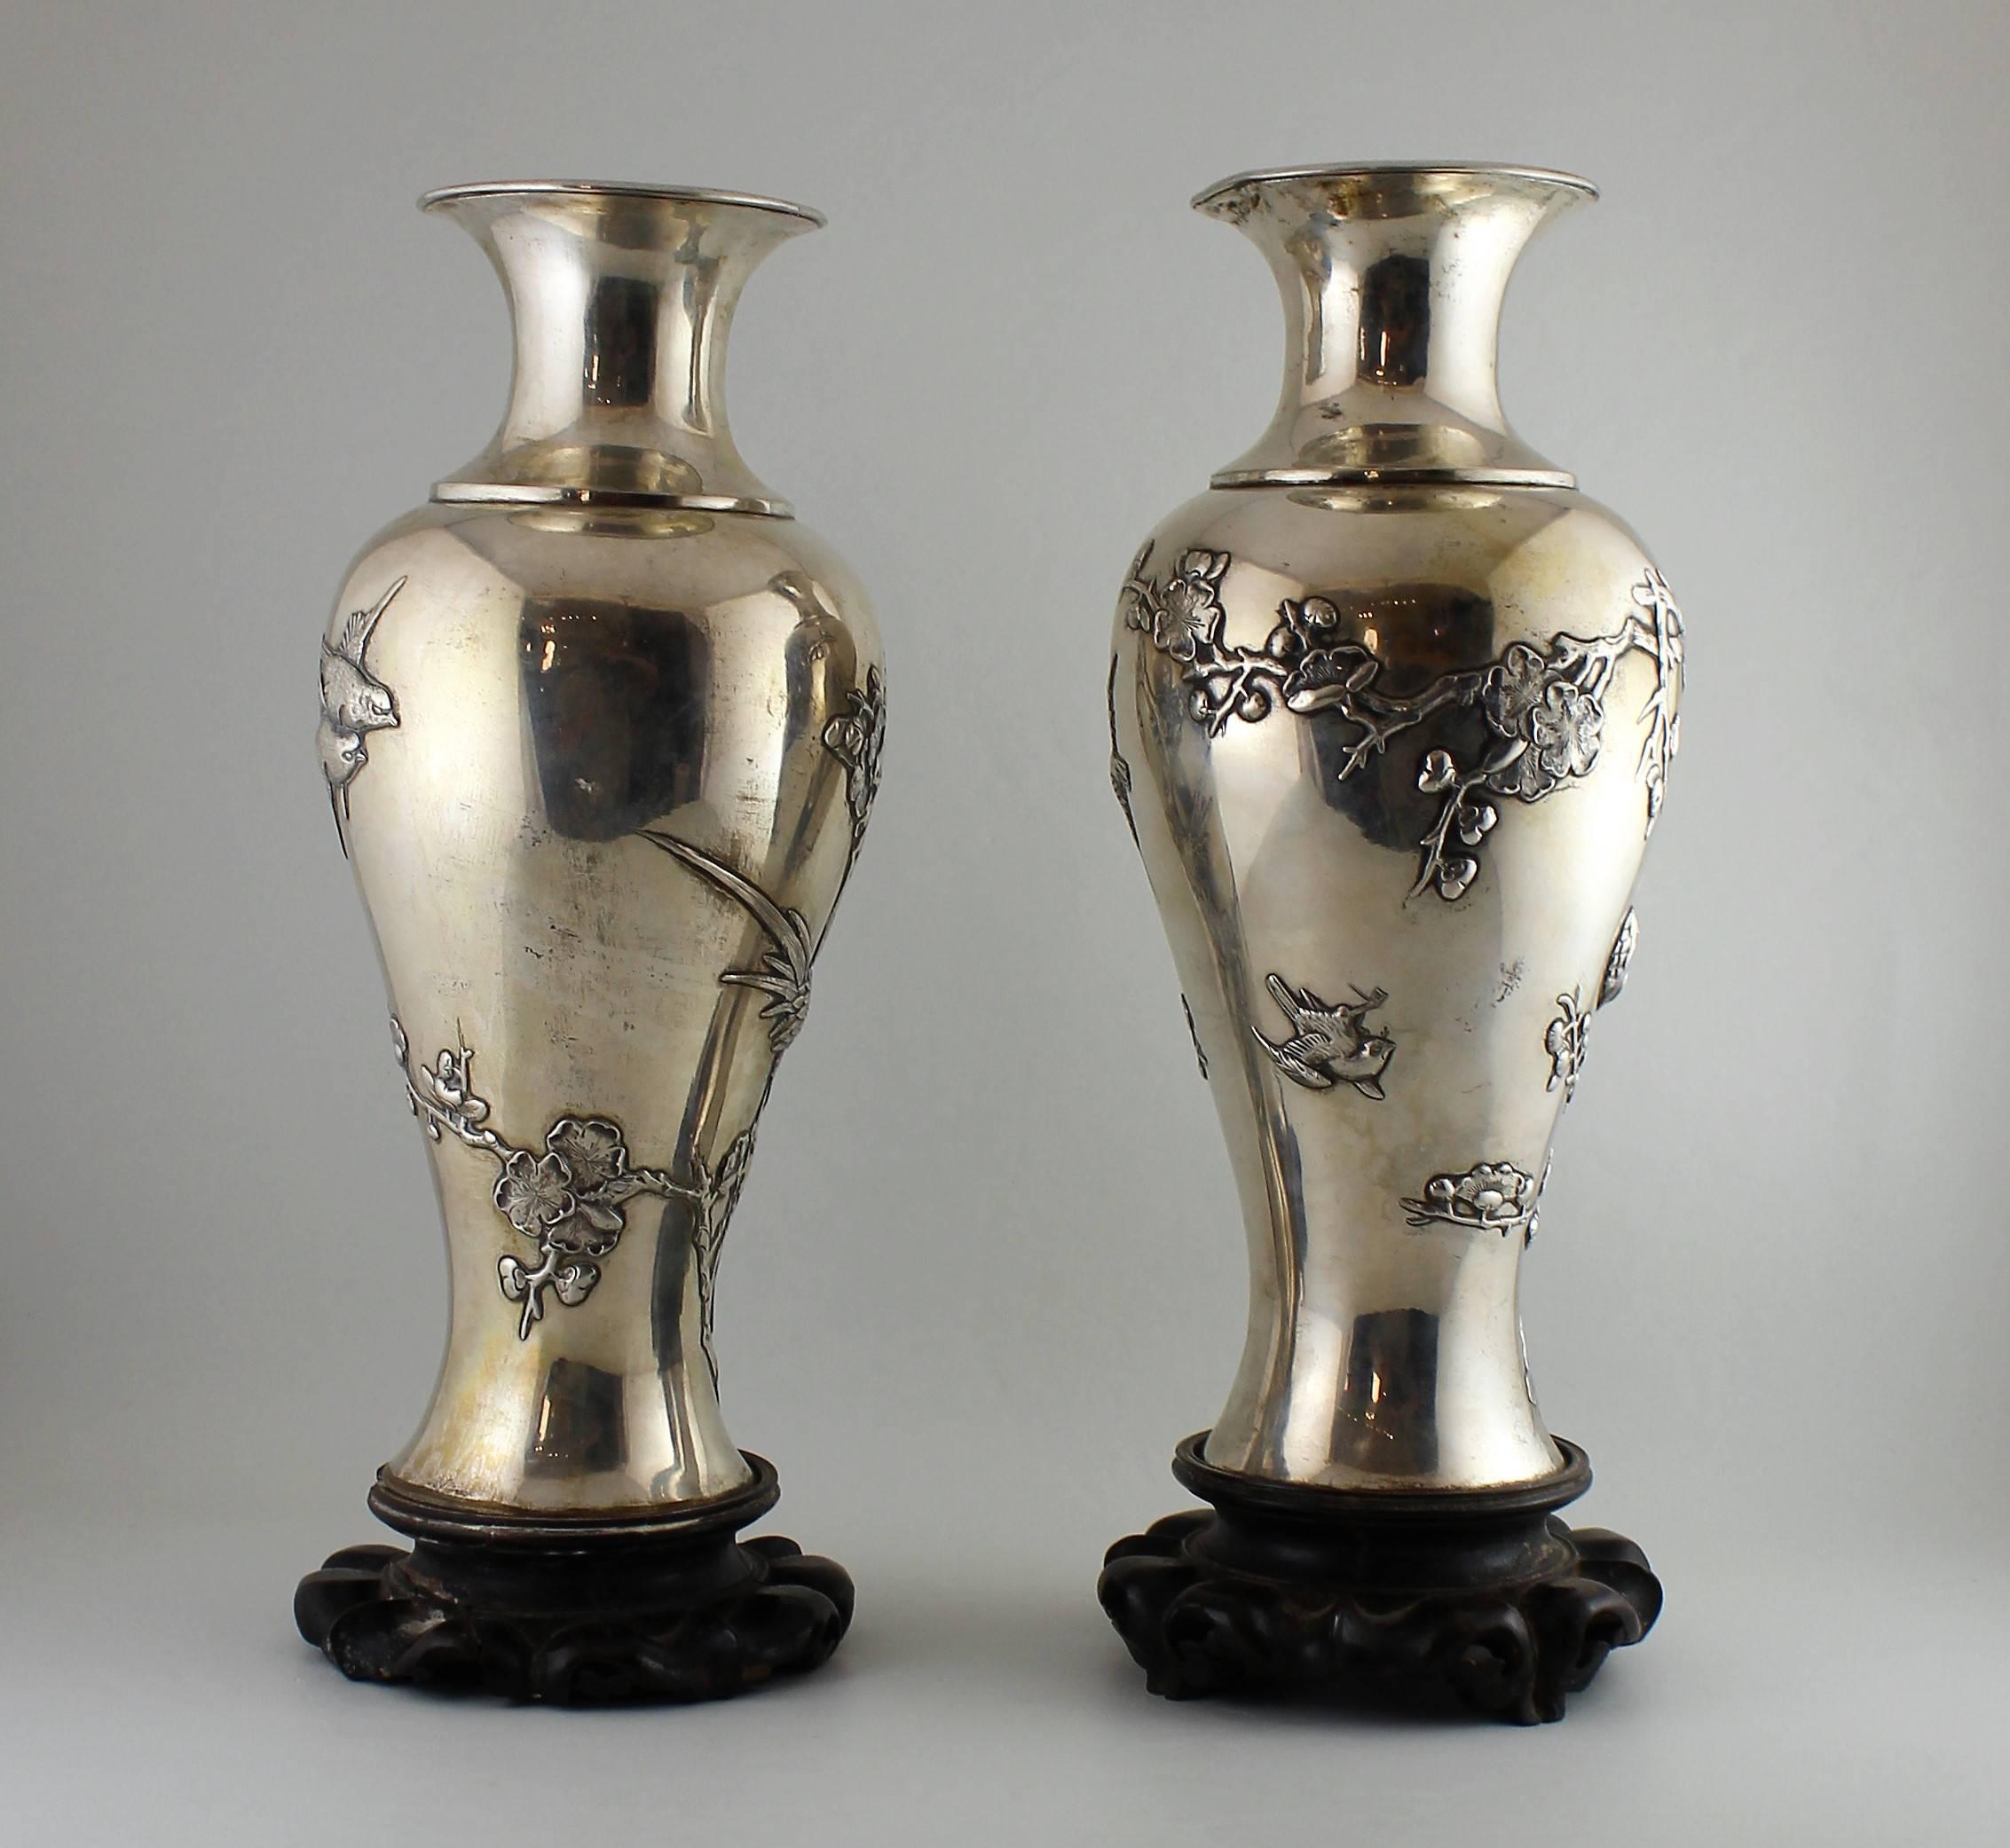 Pair of 19th century Chinese Pao Kuang 'Canton' silver vases.